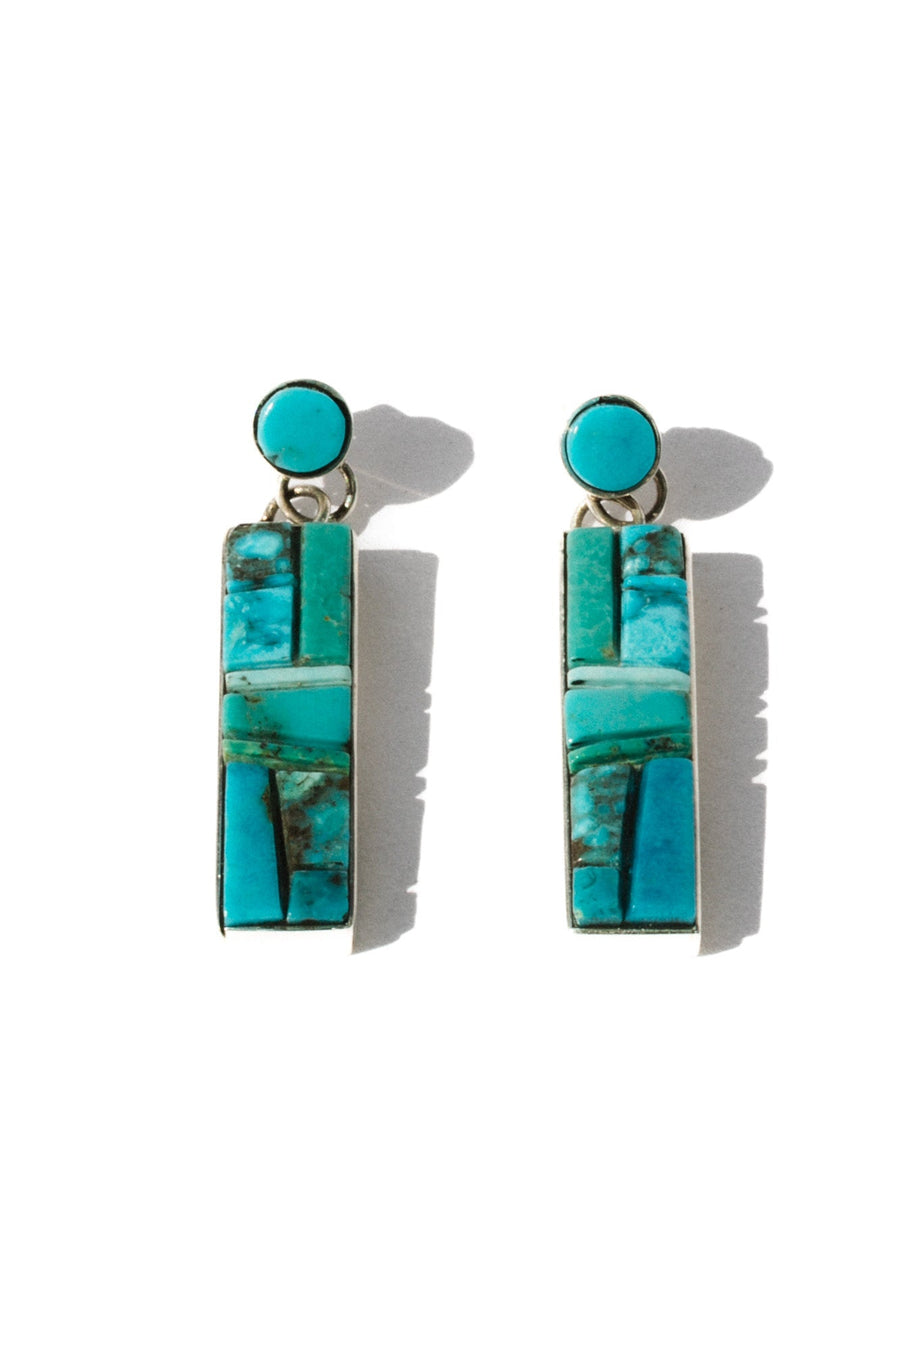 Sunwest Jewelry Silver / Turquoise Ancient Blue Statement Earrings